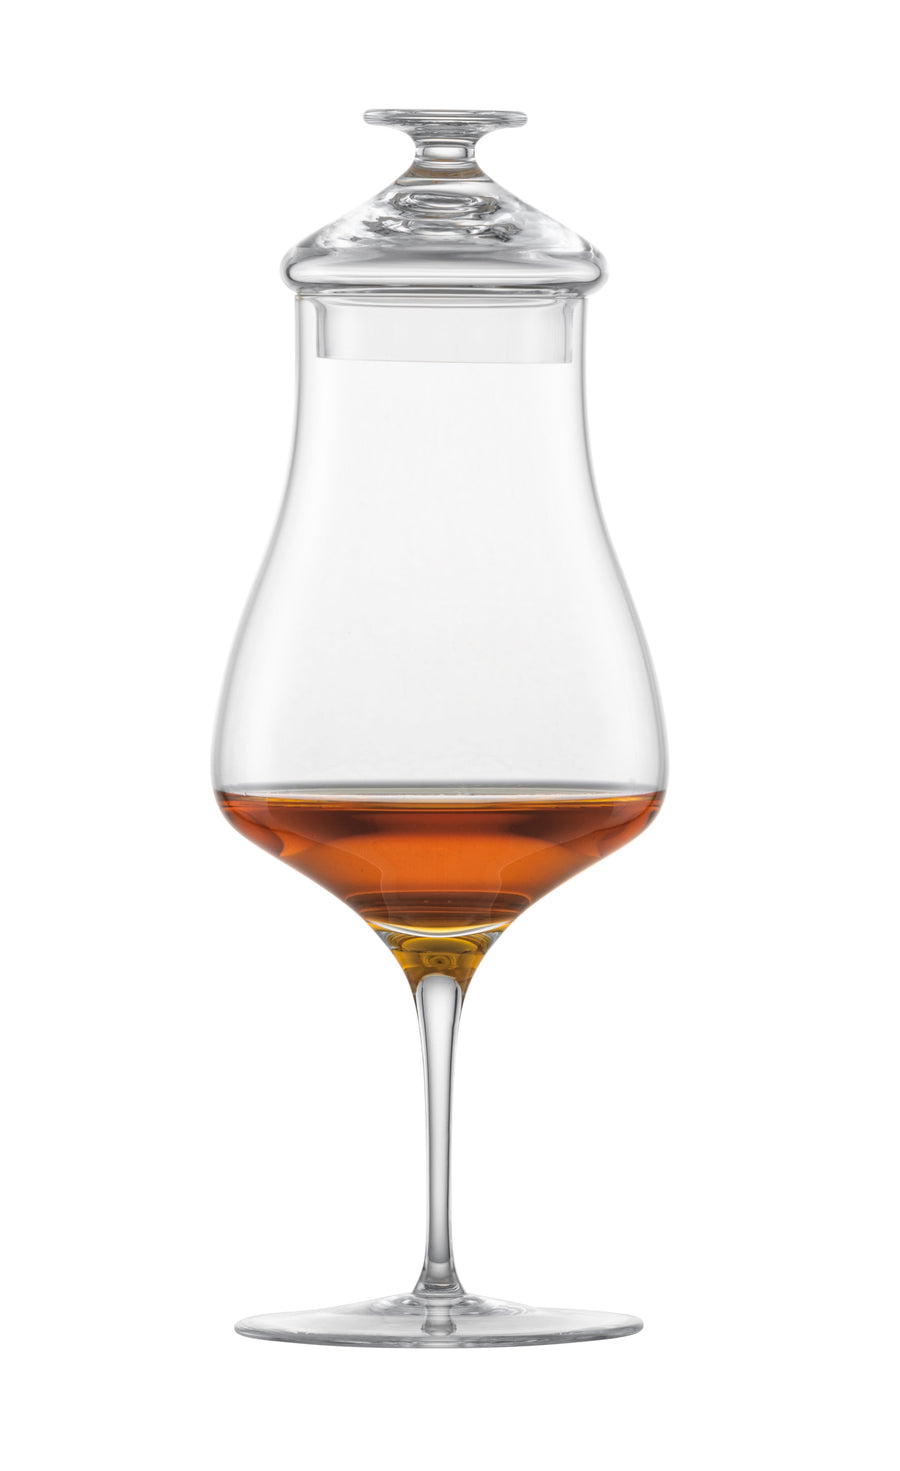 ZWIESEL GLAS | Alloro Whisky Nosing Glass with Lid Handmade Set of 2